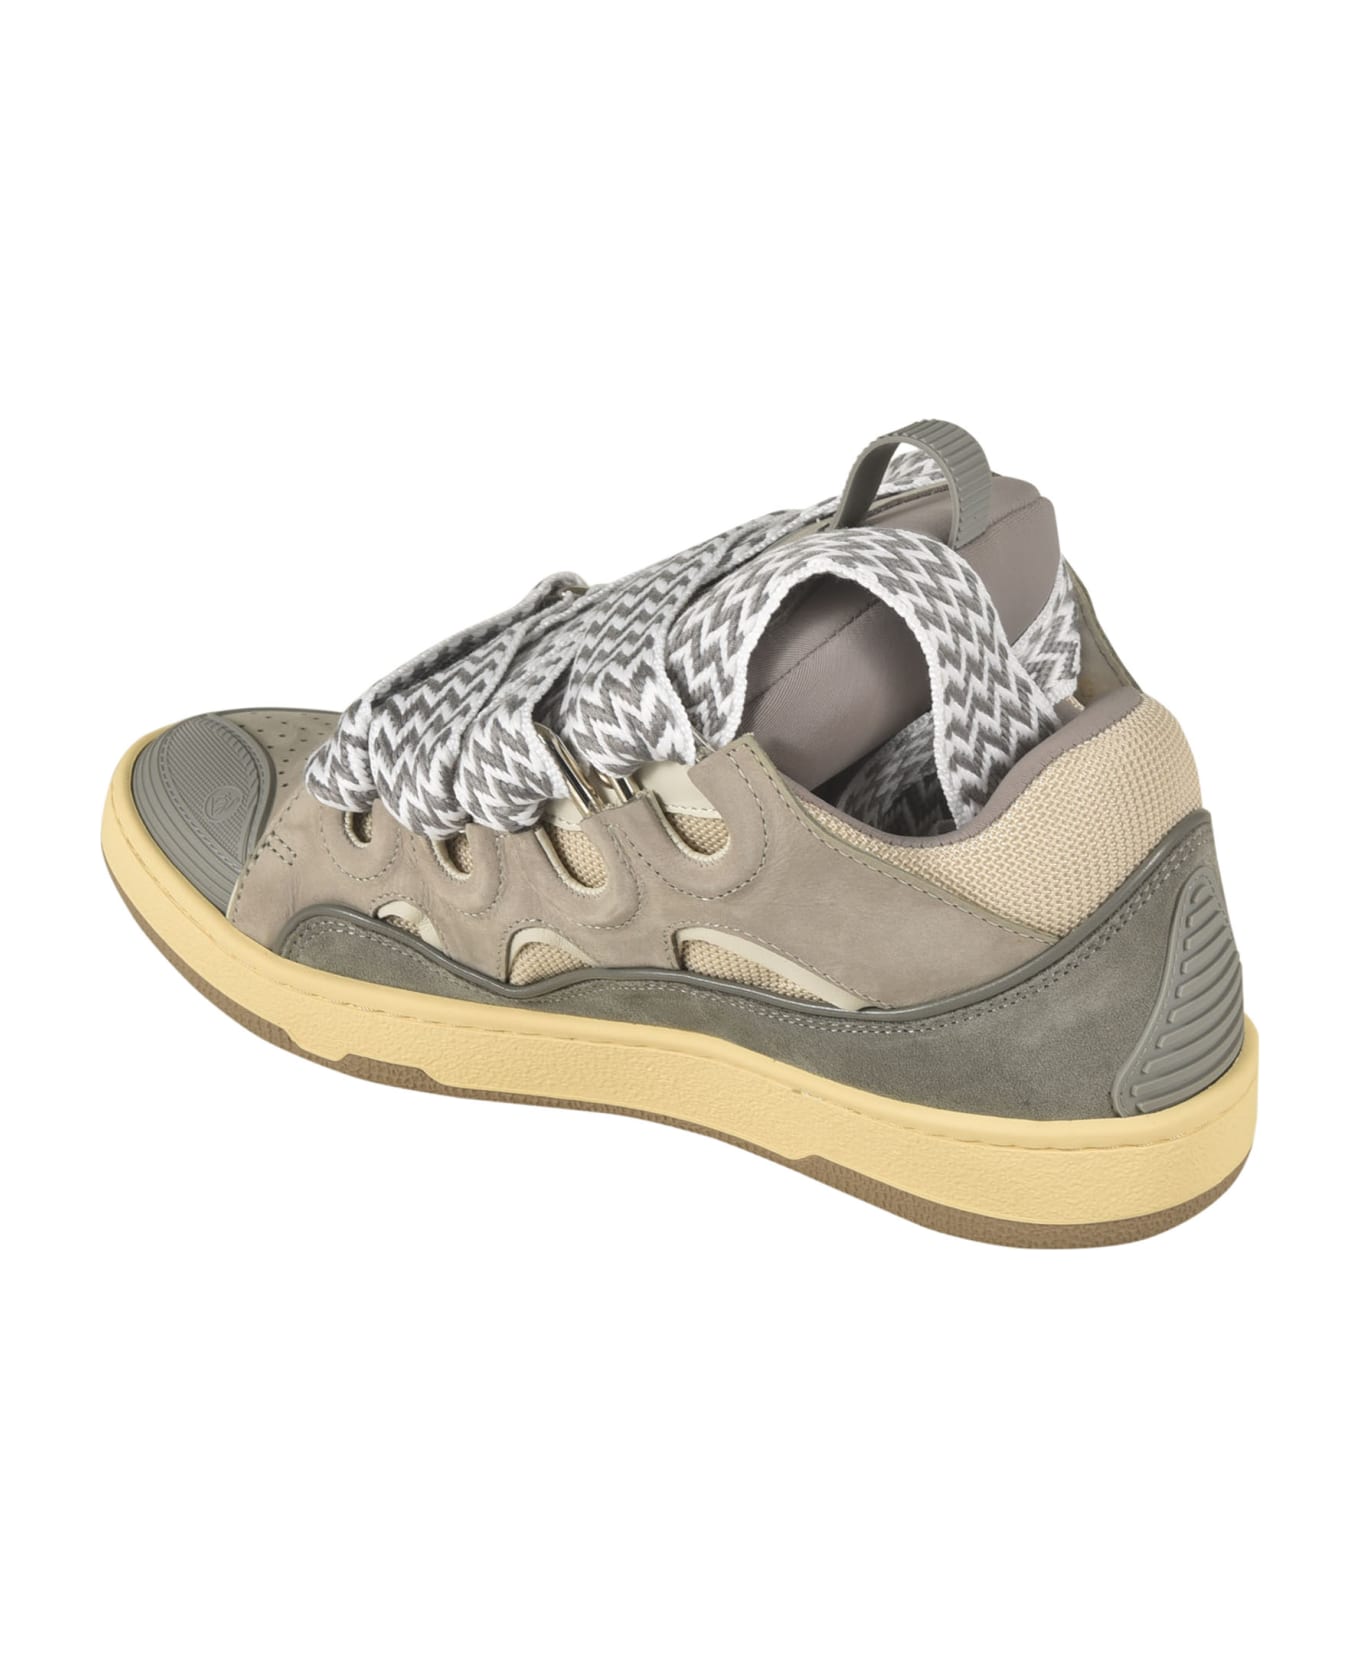 Lanvin Thick Lace Sneakers - Grey